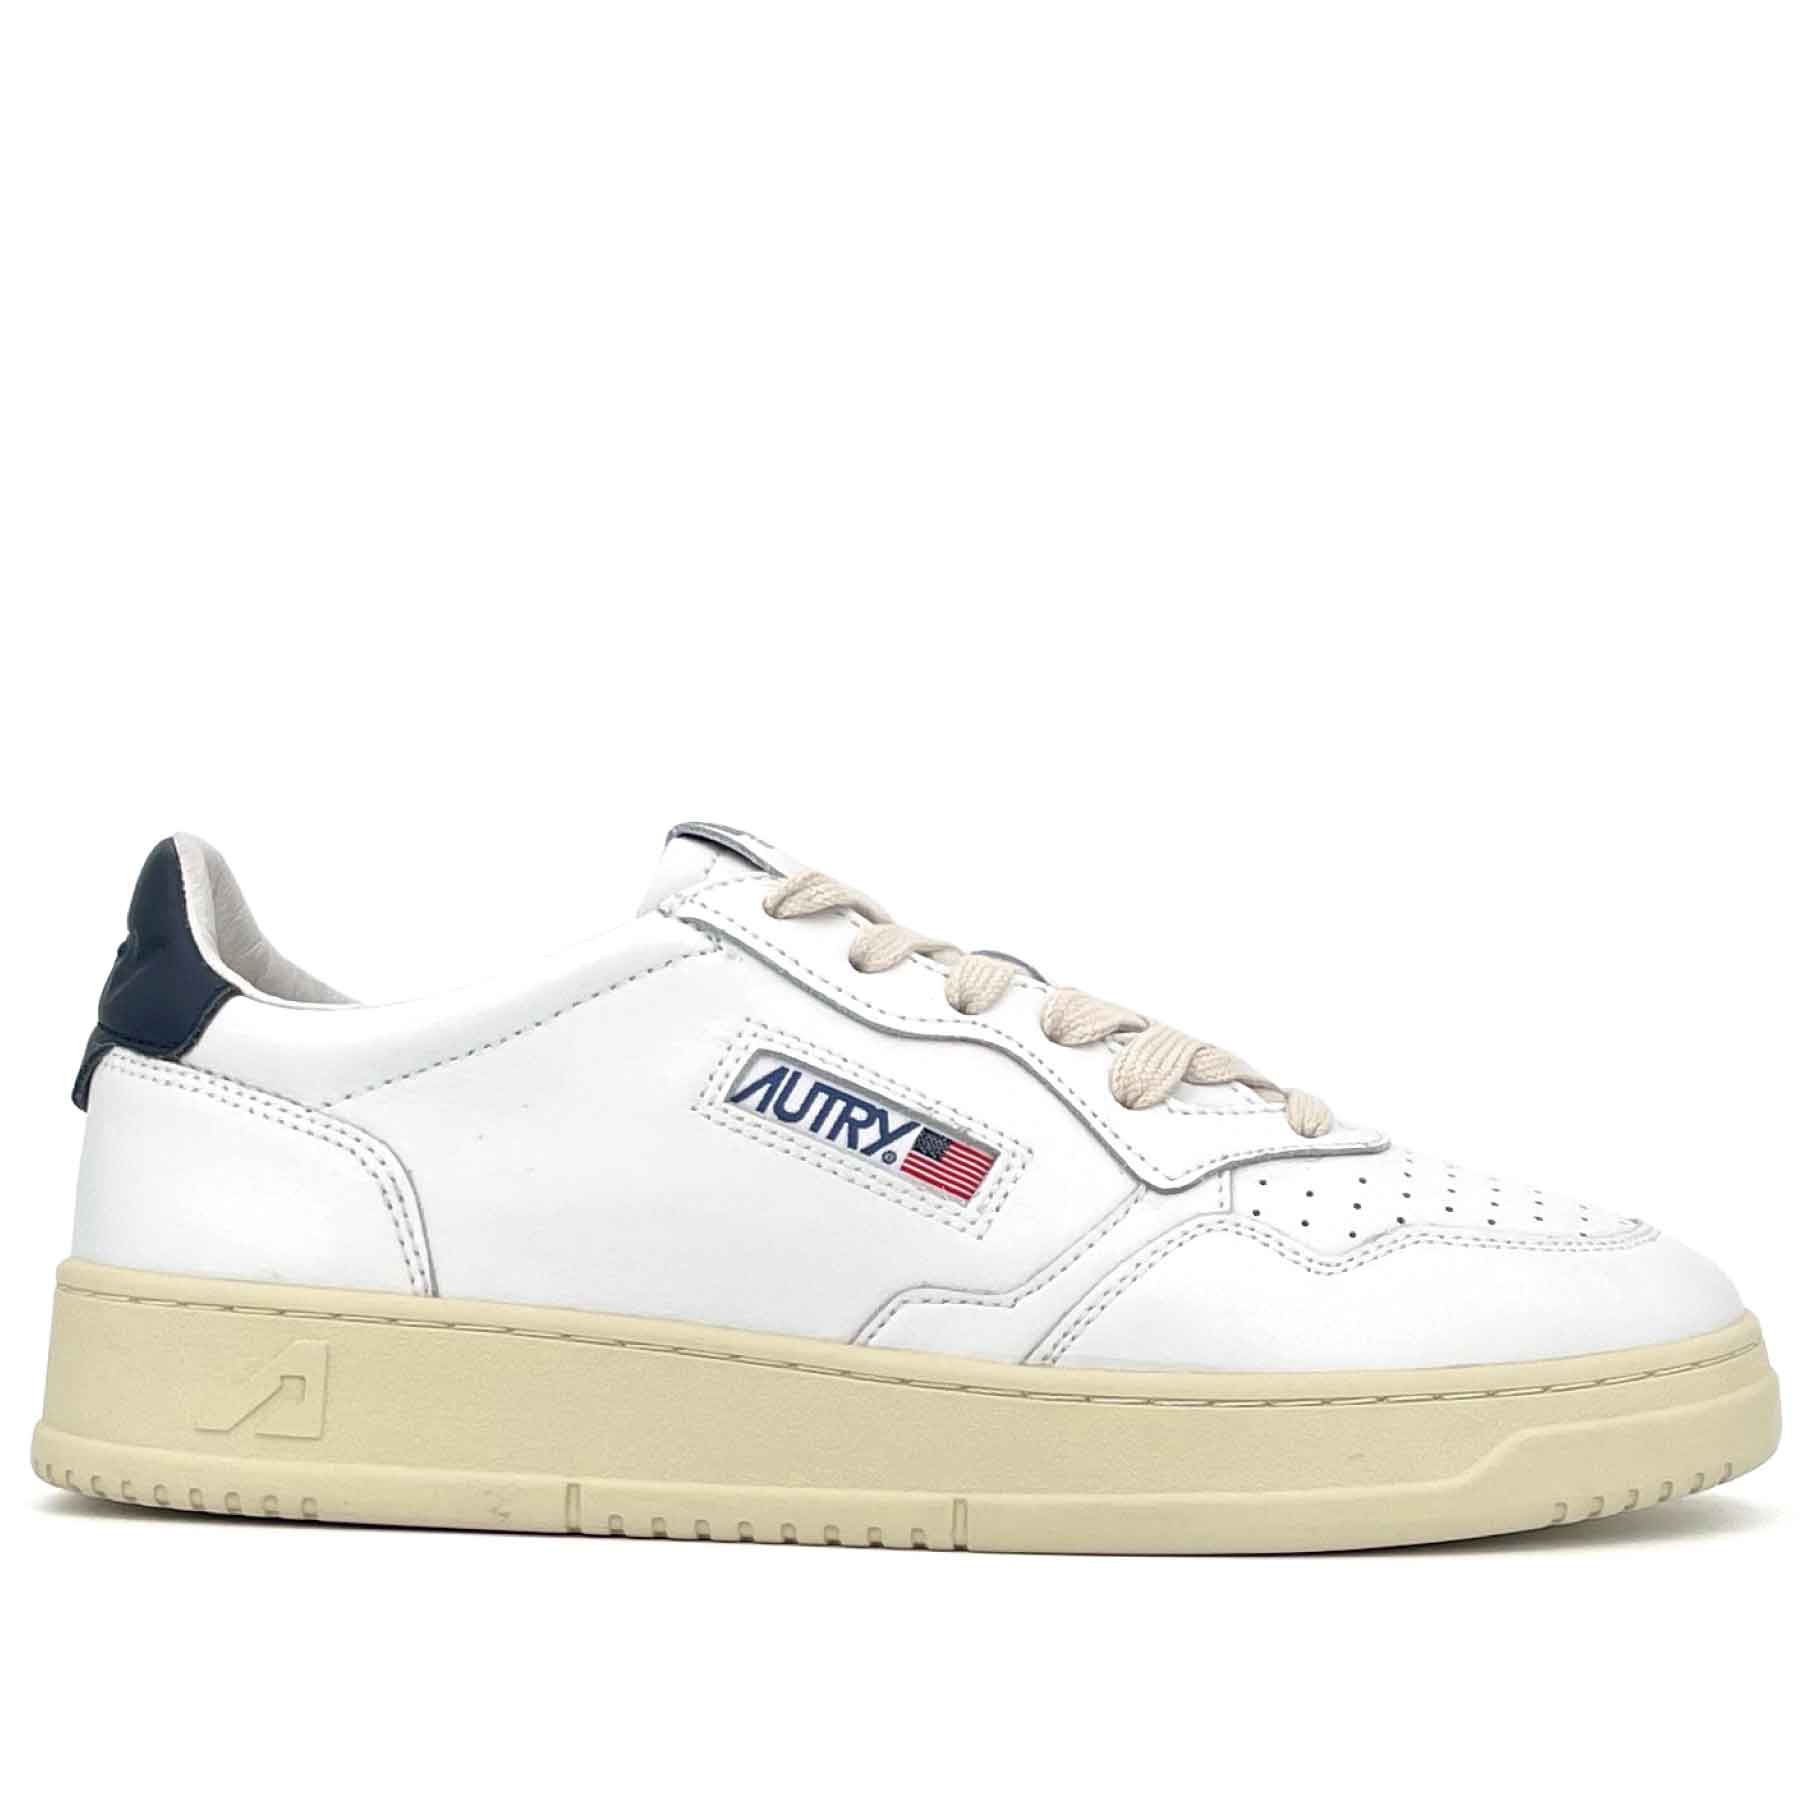 01 Medalist Low Man White Navy Leather